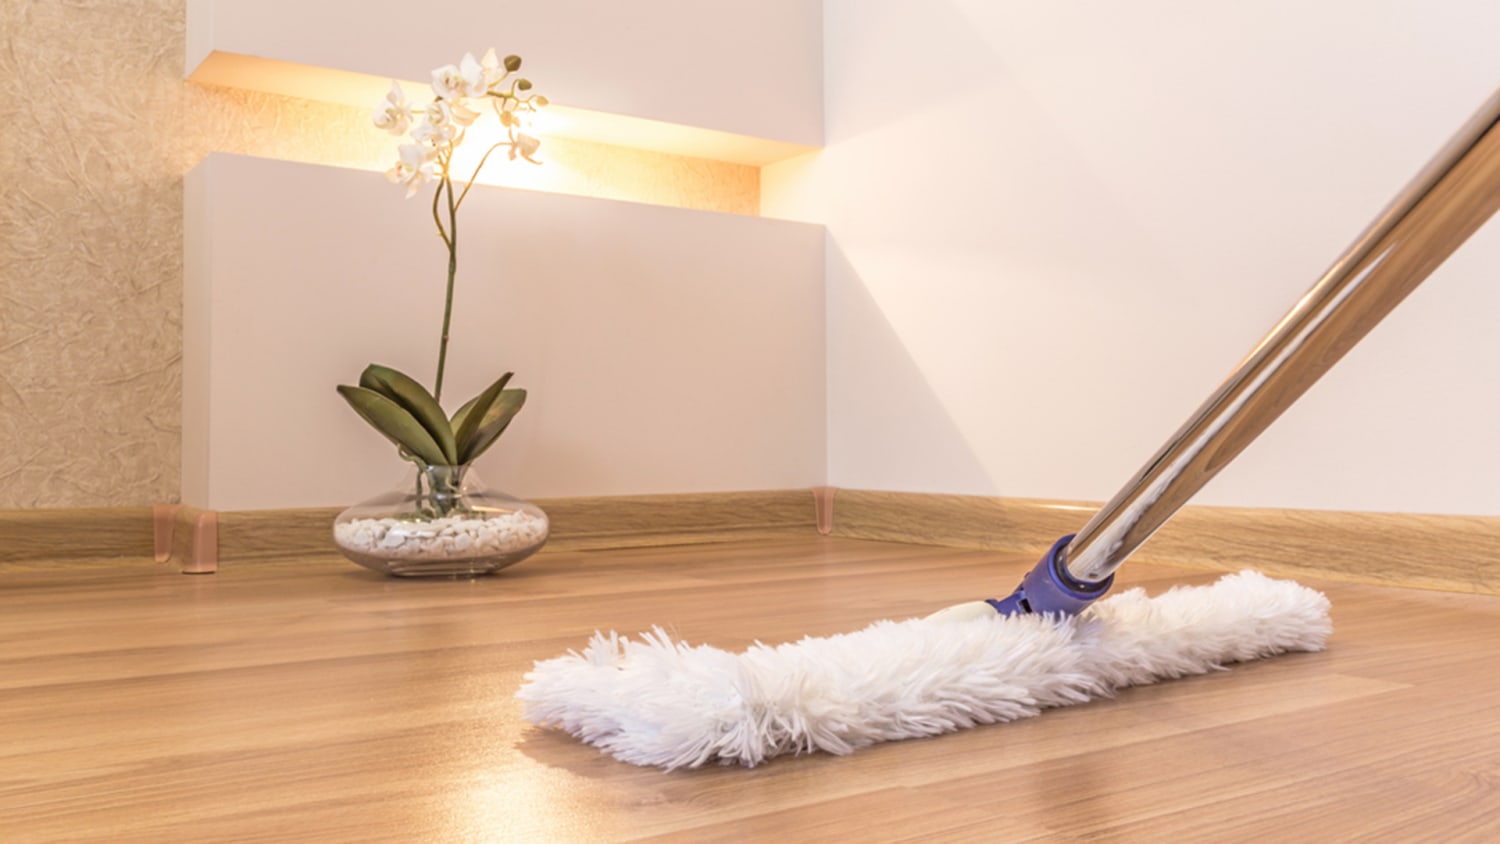 How To Clean Hardwood Floors The Right Way, Dry Mop For Hardwood Floors